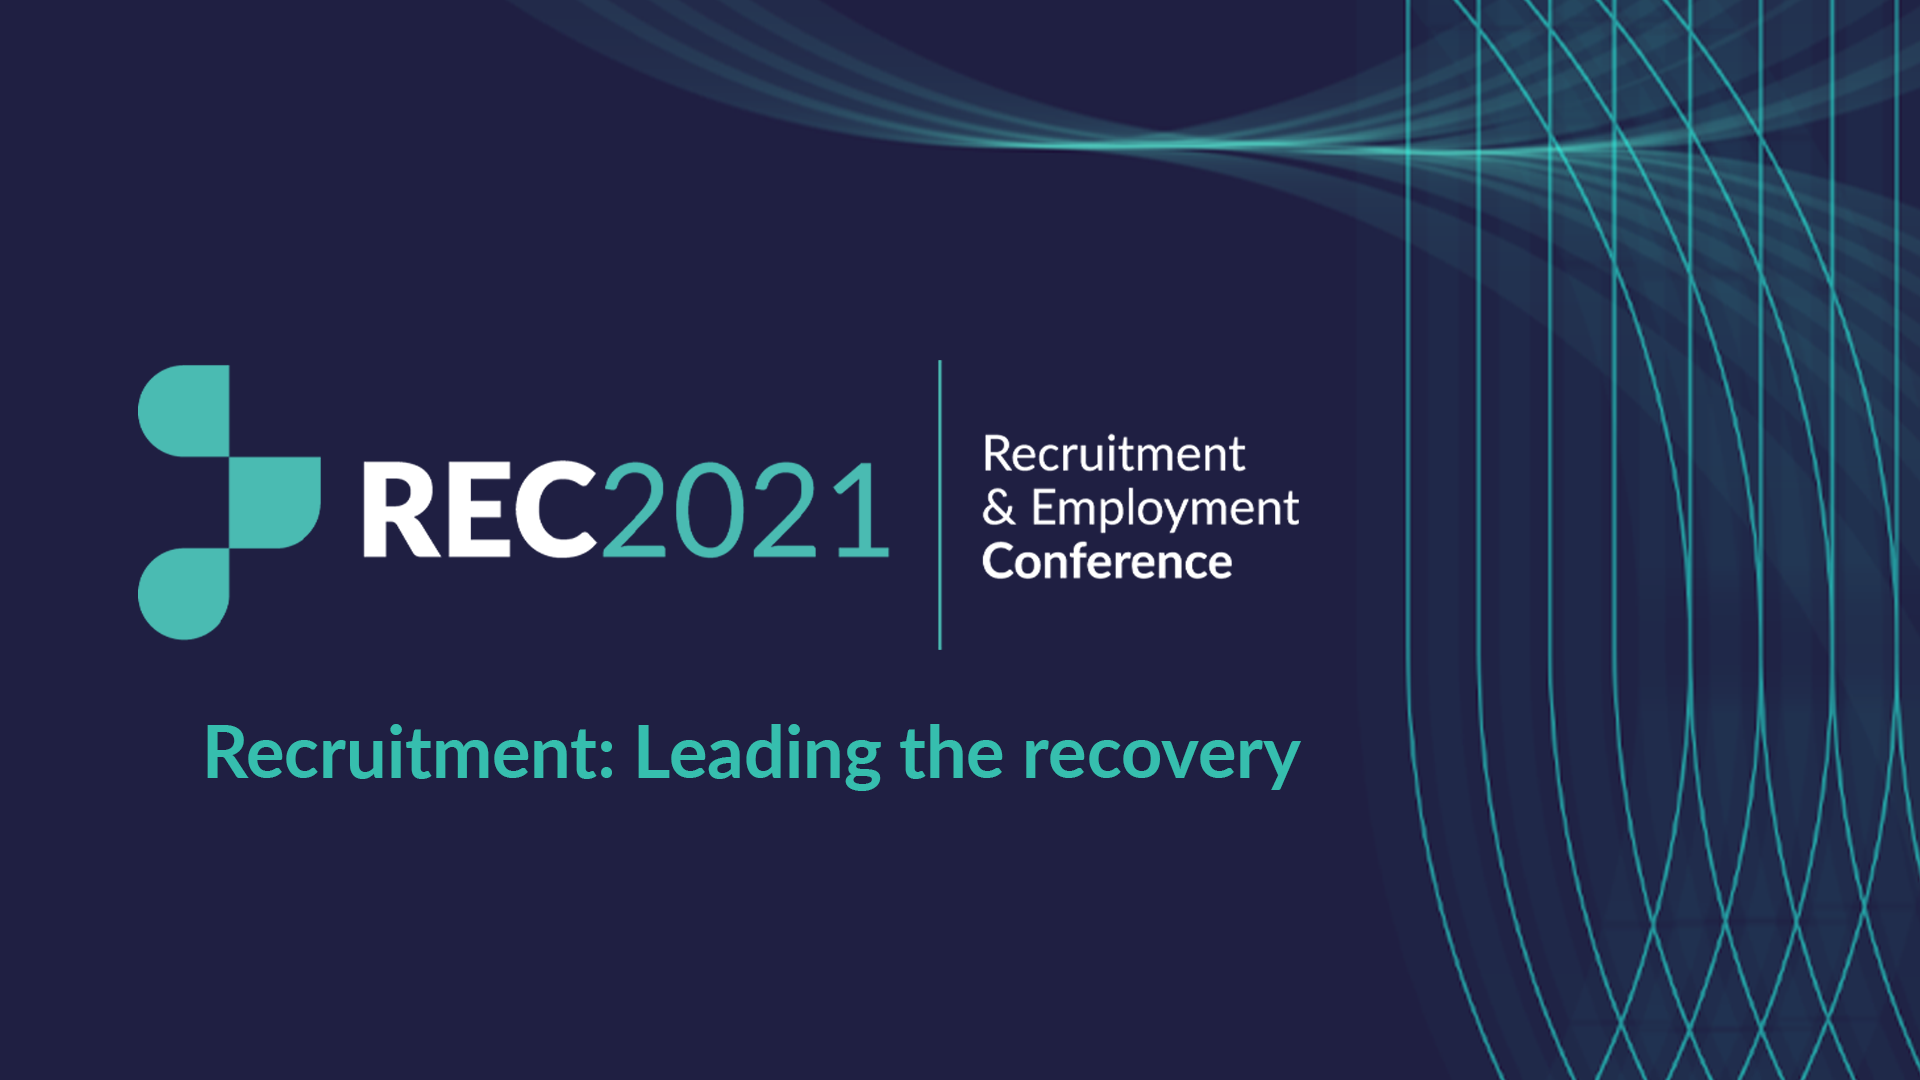 Flyer for REC 2021, the annual conference of the Recruitment and Employment Confederation (REC) at which Pixid were the Headline sponsors.